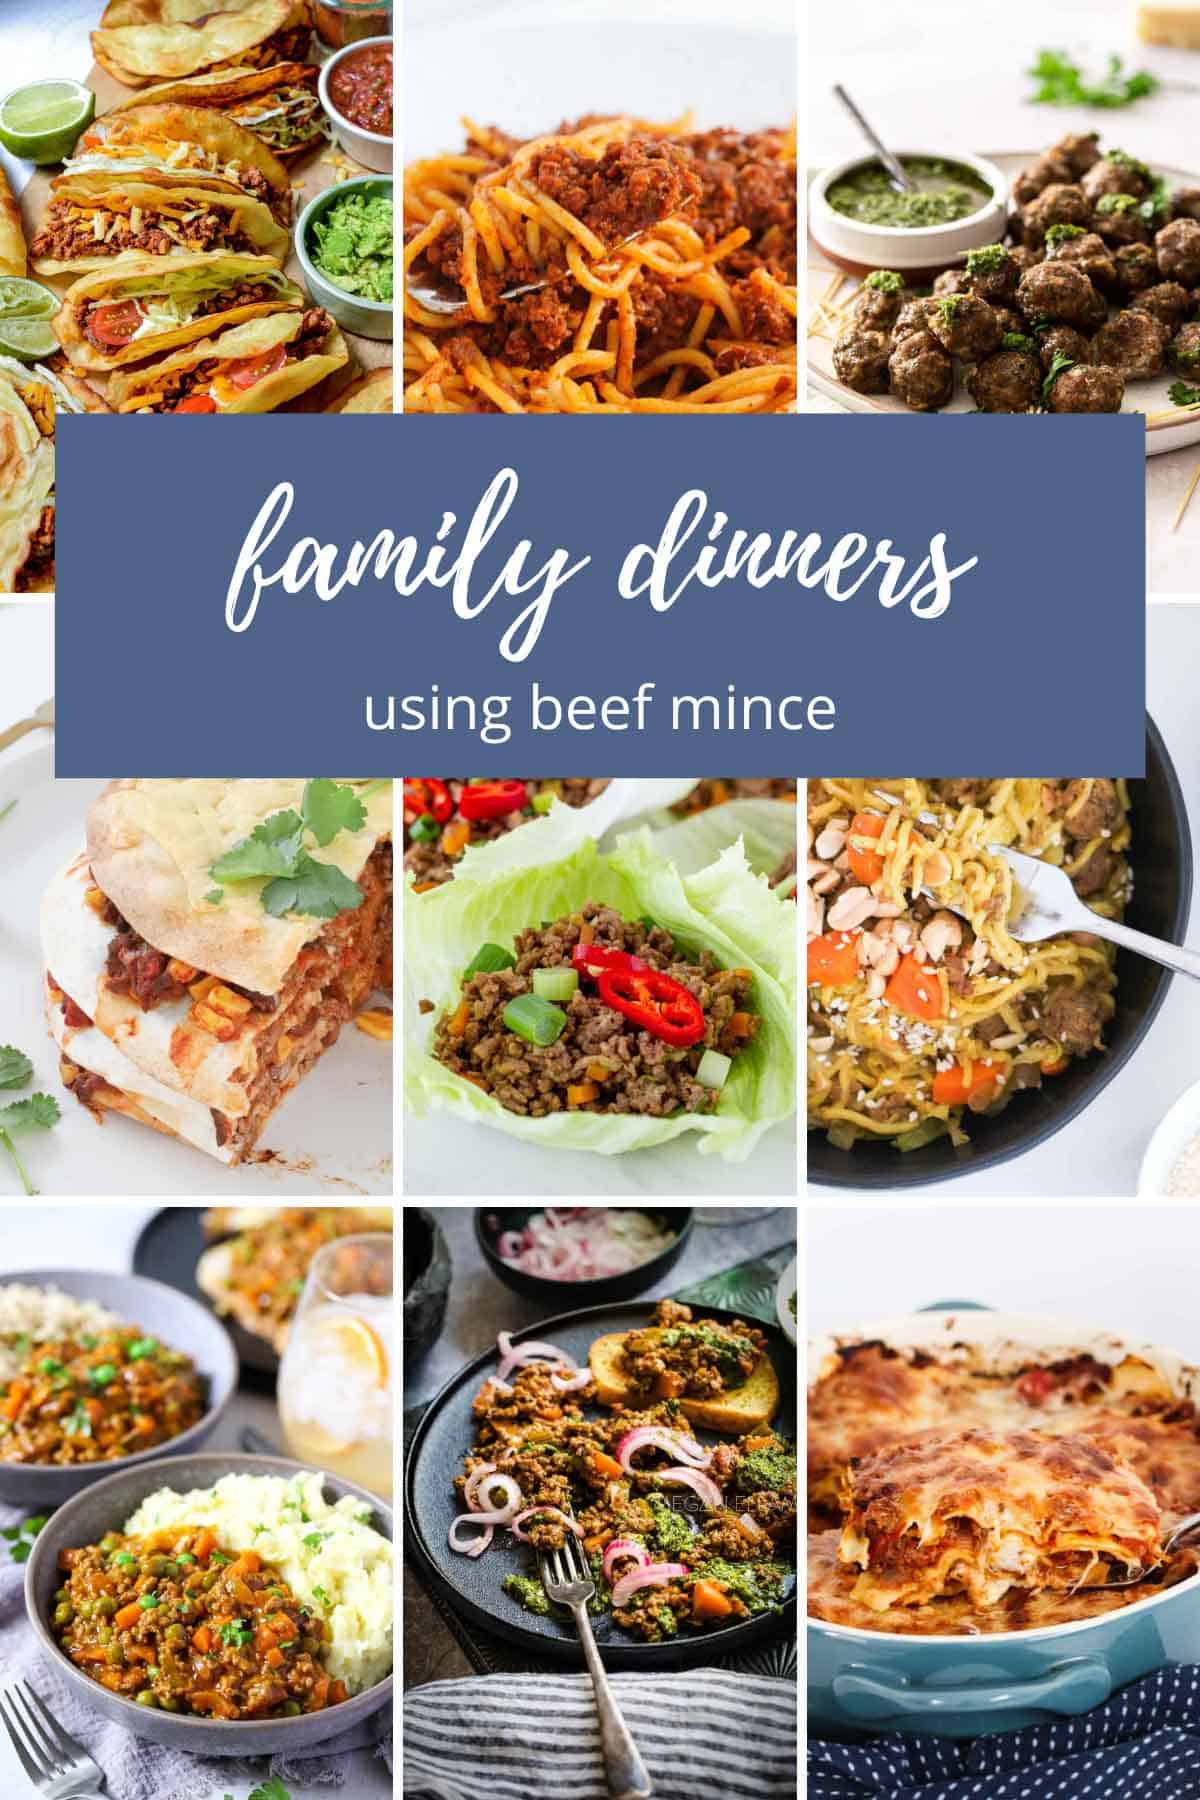 A collage of dinner recipes made using beef mince.